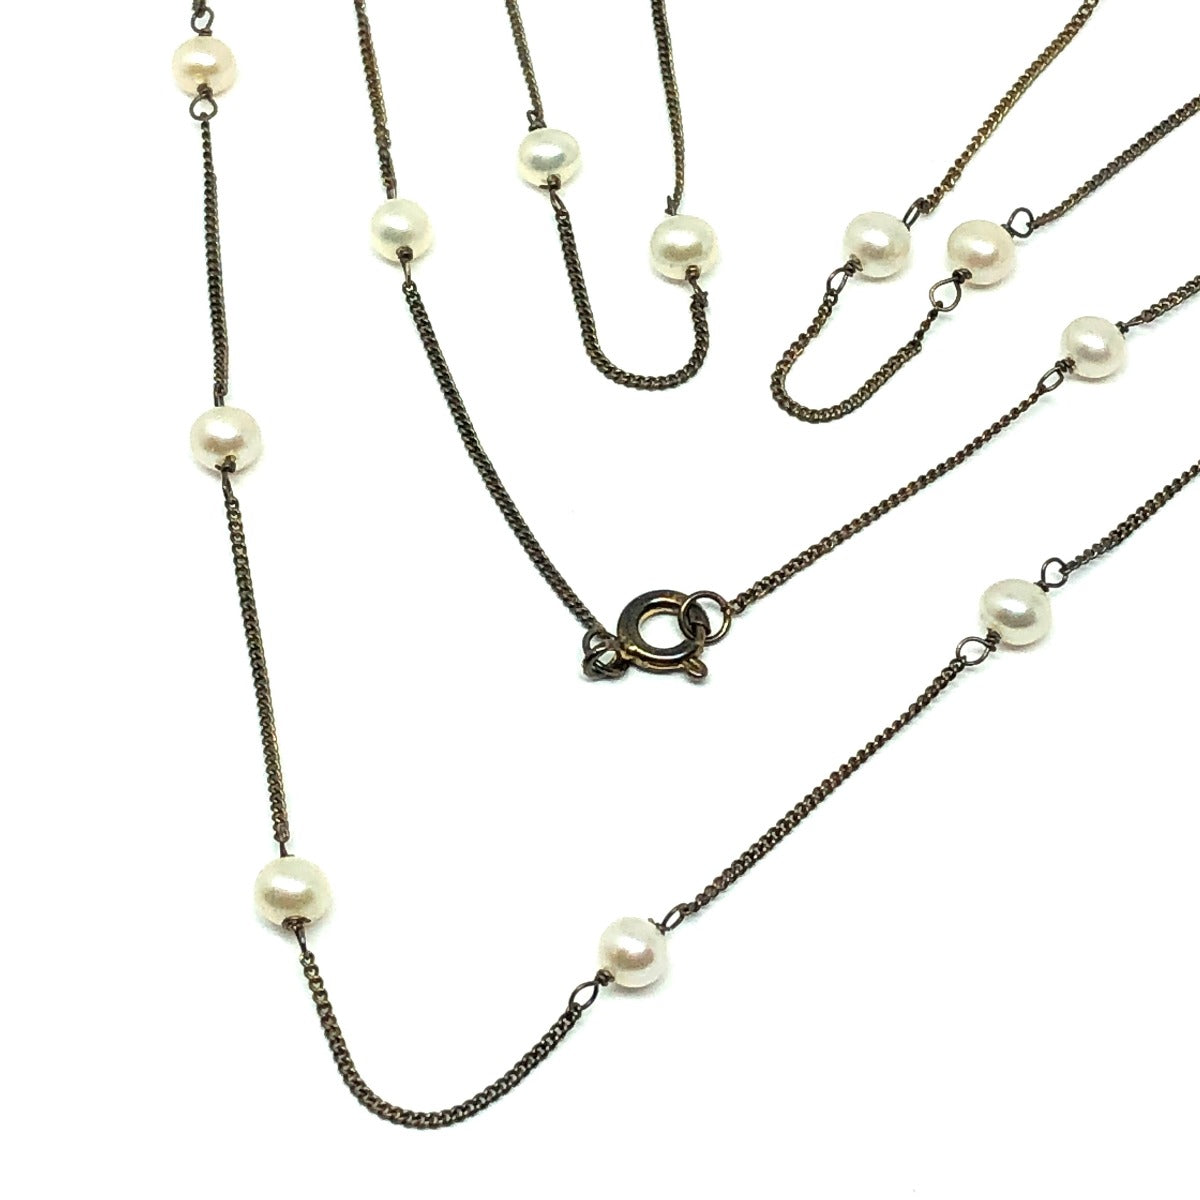 32" Oxidized Antiqued Gold Sterling Silver Rustic Pearl Station Necklace | Deals on Overstock Jewelry online